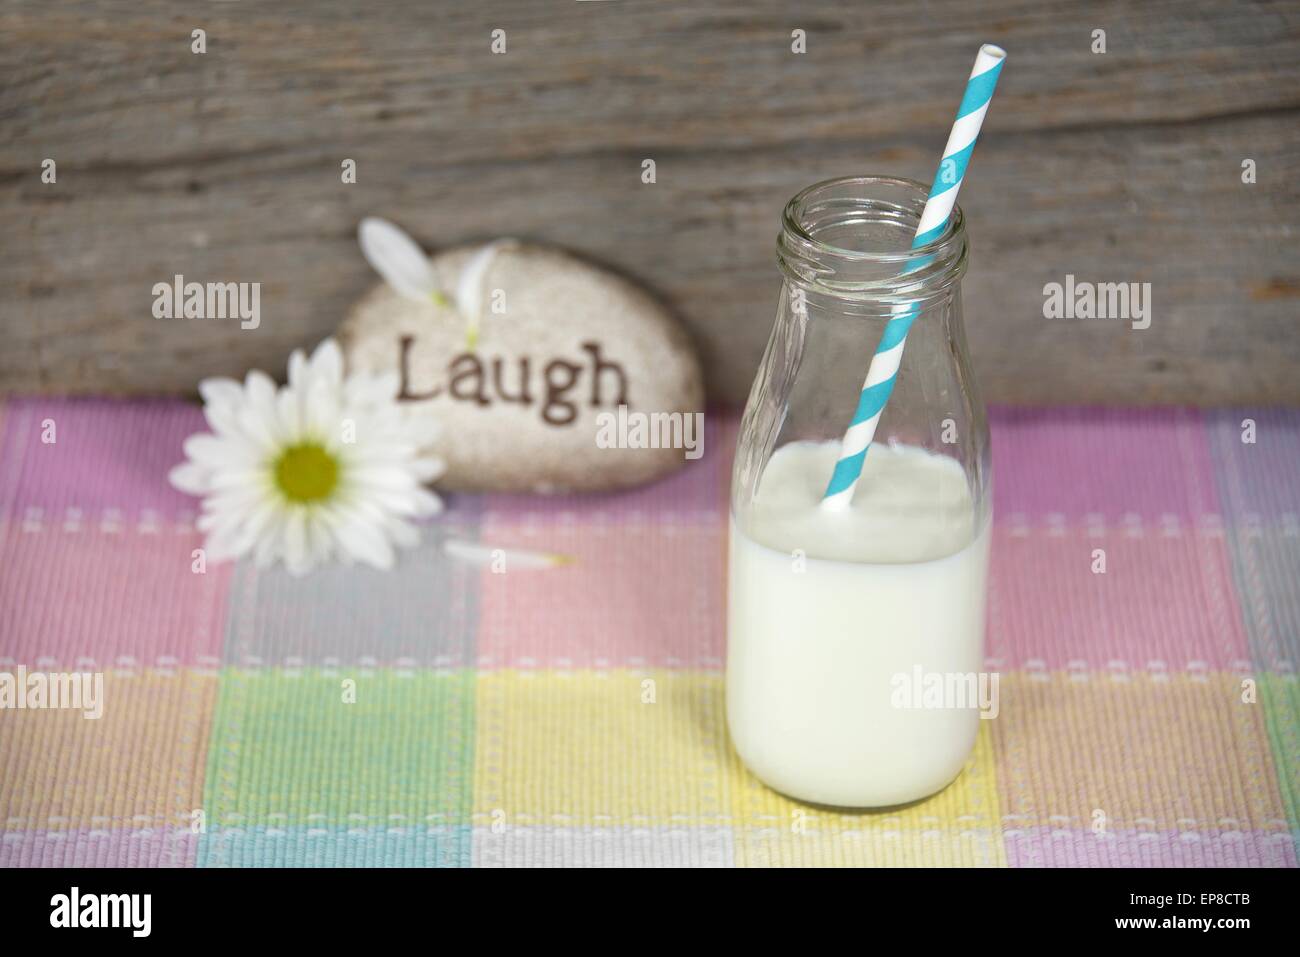 White milk and striped drinking straw in glass retro milk bottle with daisy and rock on plaid fabric. Stock Photo